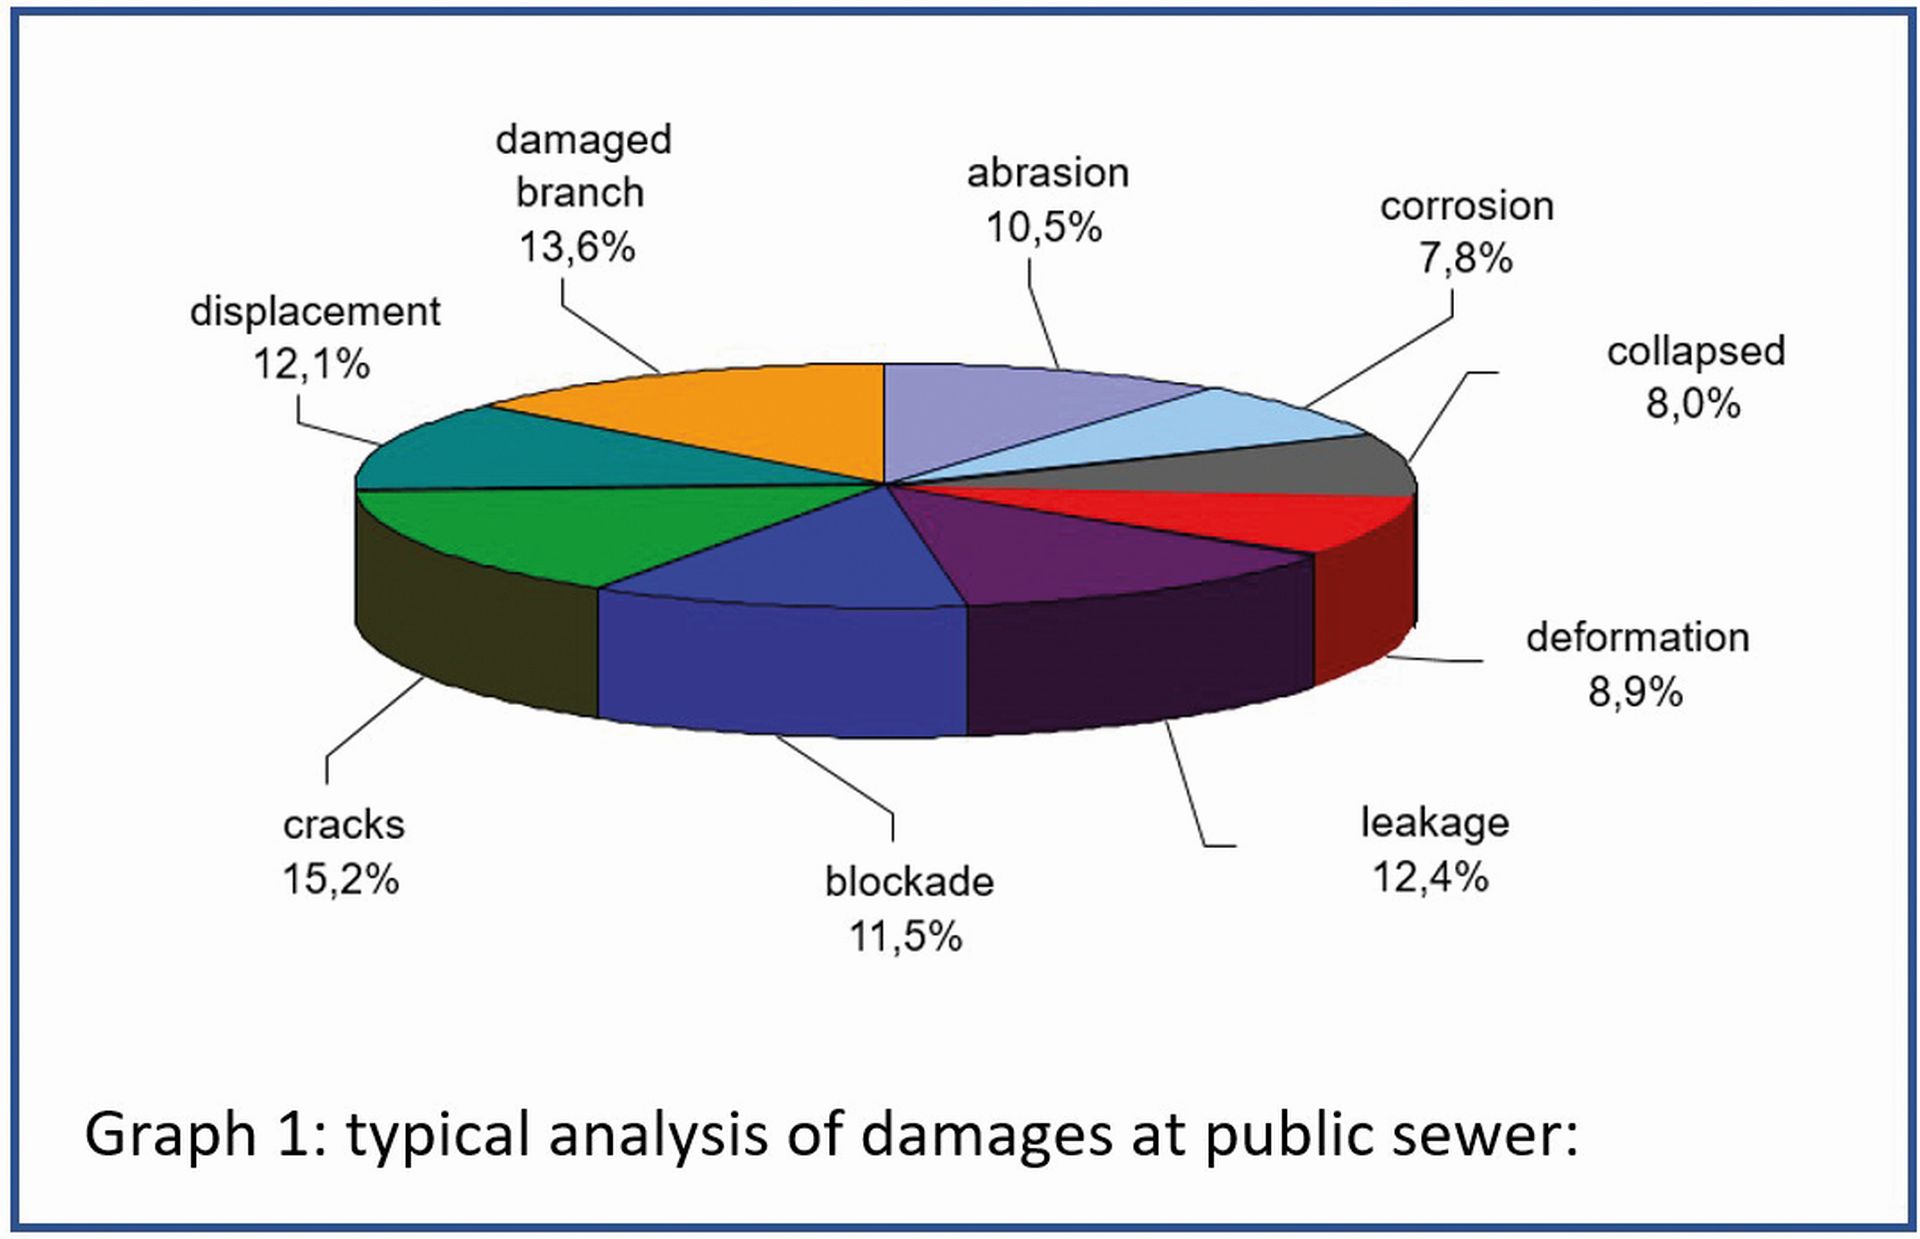 Typical analysis of damages at public sewers